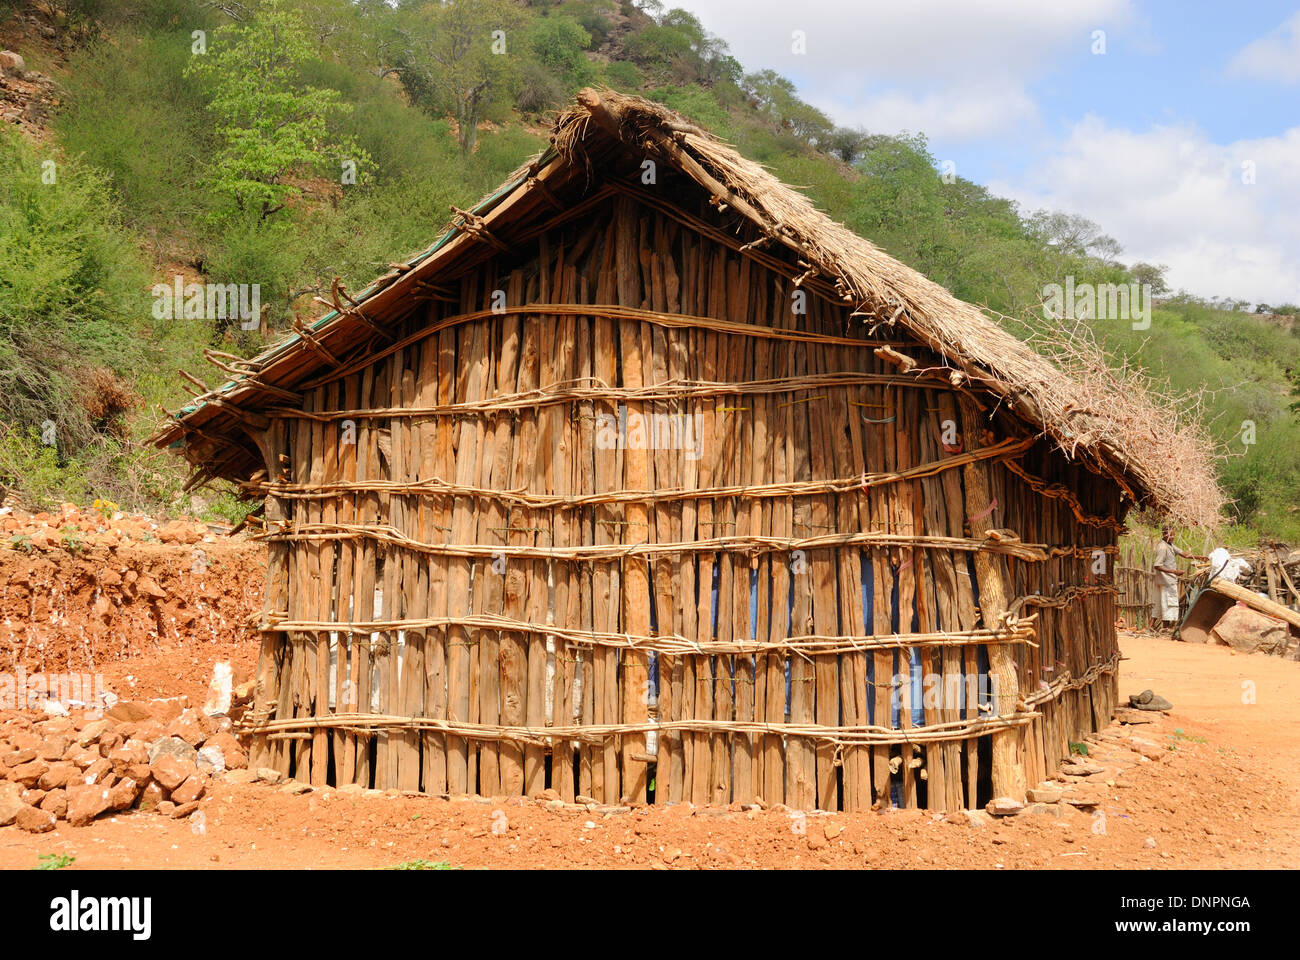 Big Djiboutian hut in a village in northern Djibouti, Horn of Africa Stock Photo